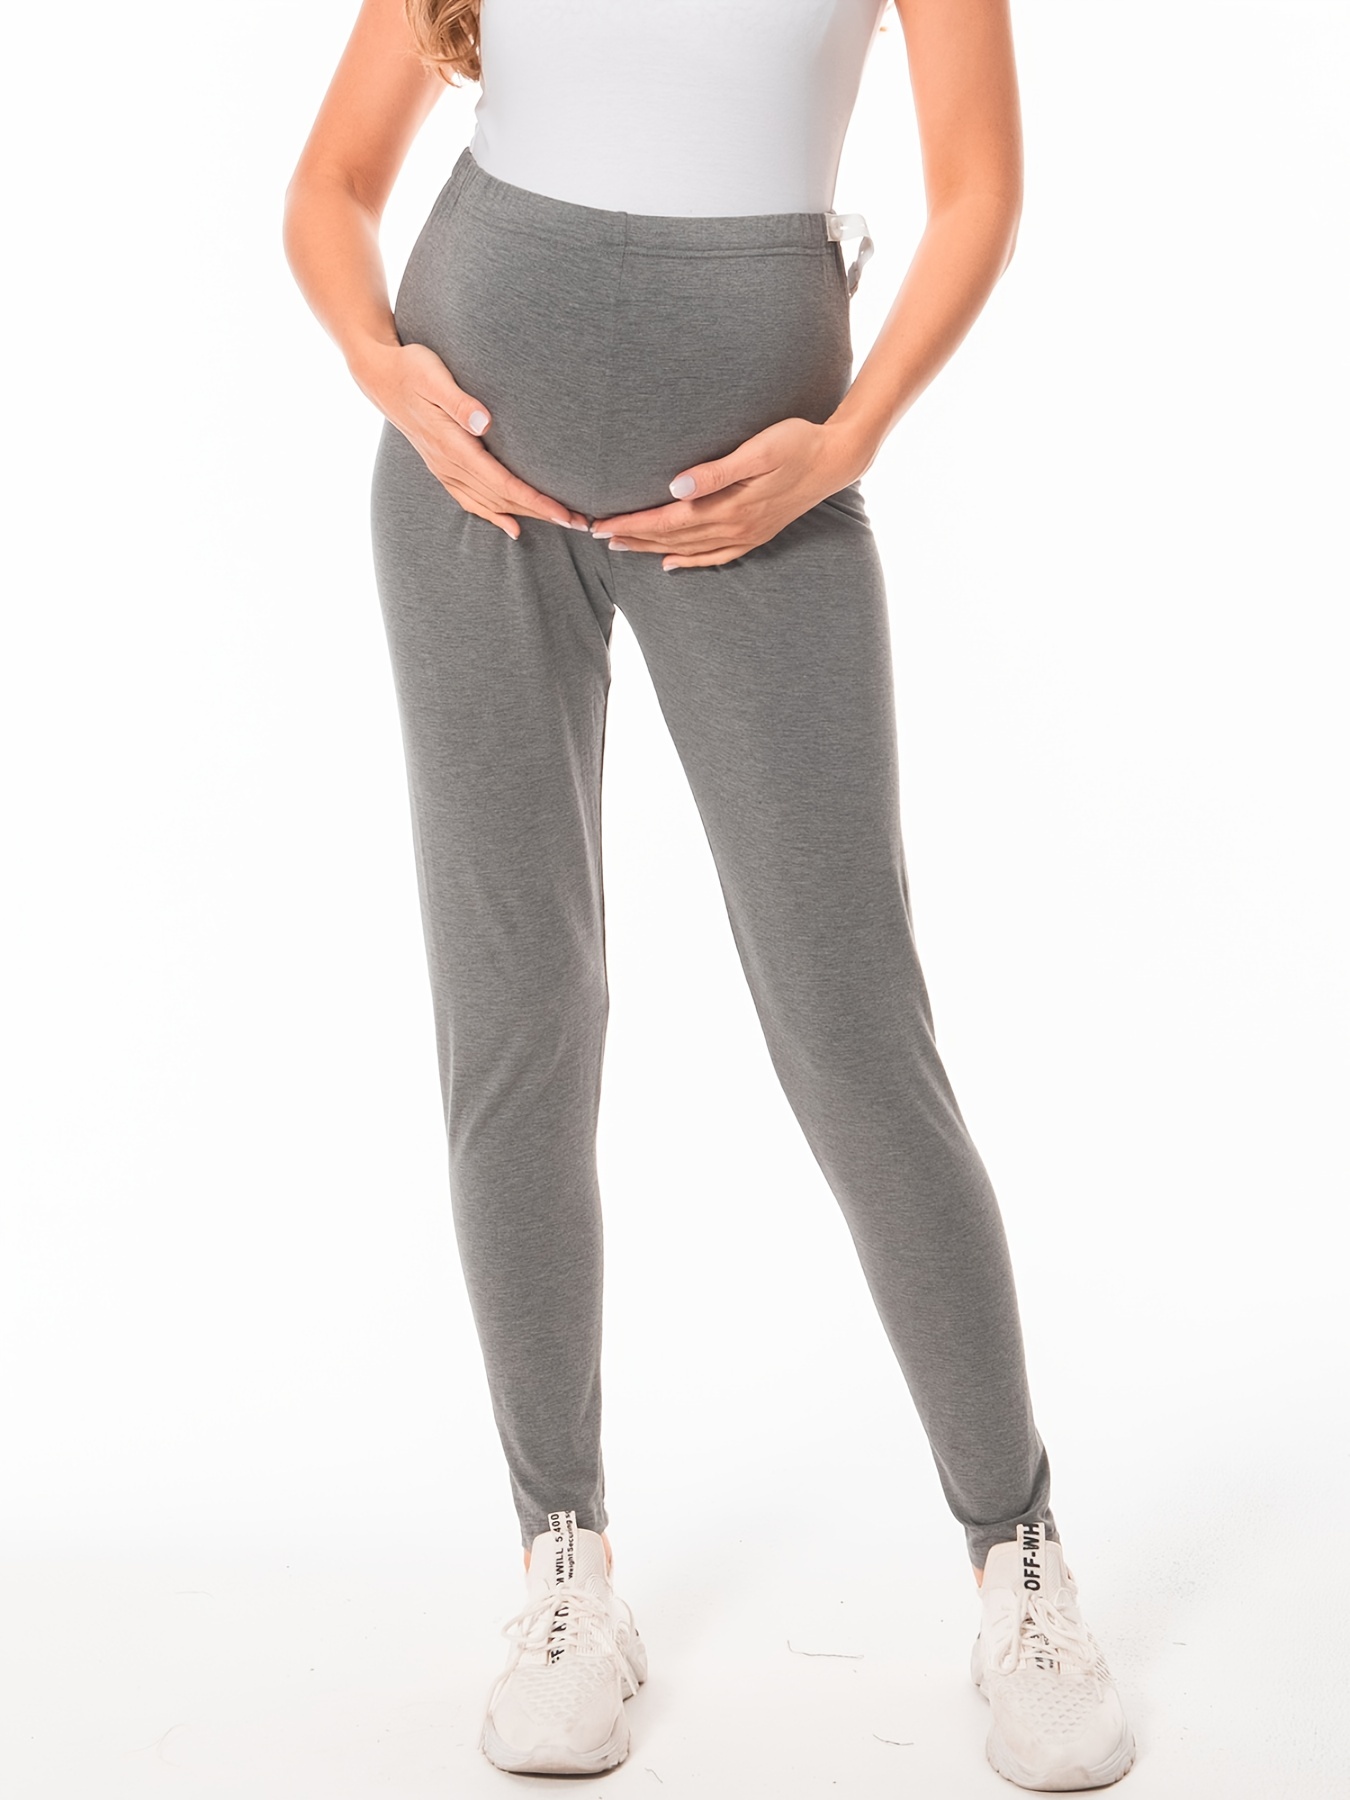 Extra Thick Fleece Lining Maternity Winter Legging for Pregnant Women -  Winter Clothes